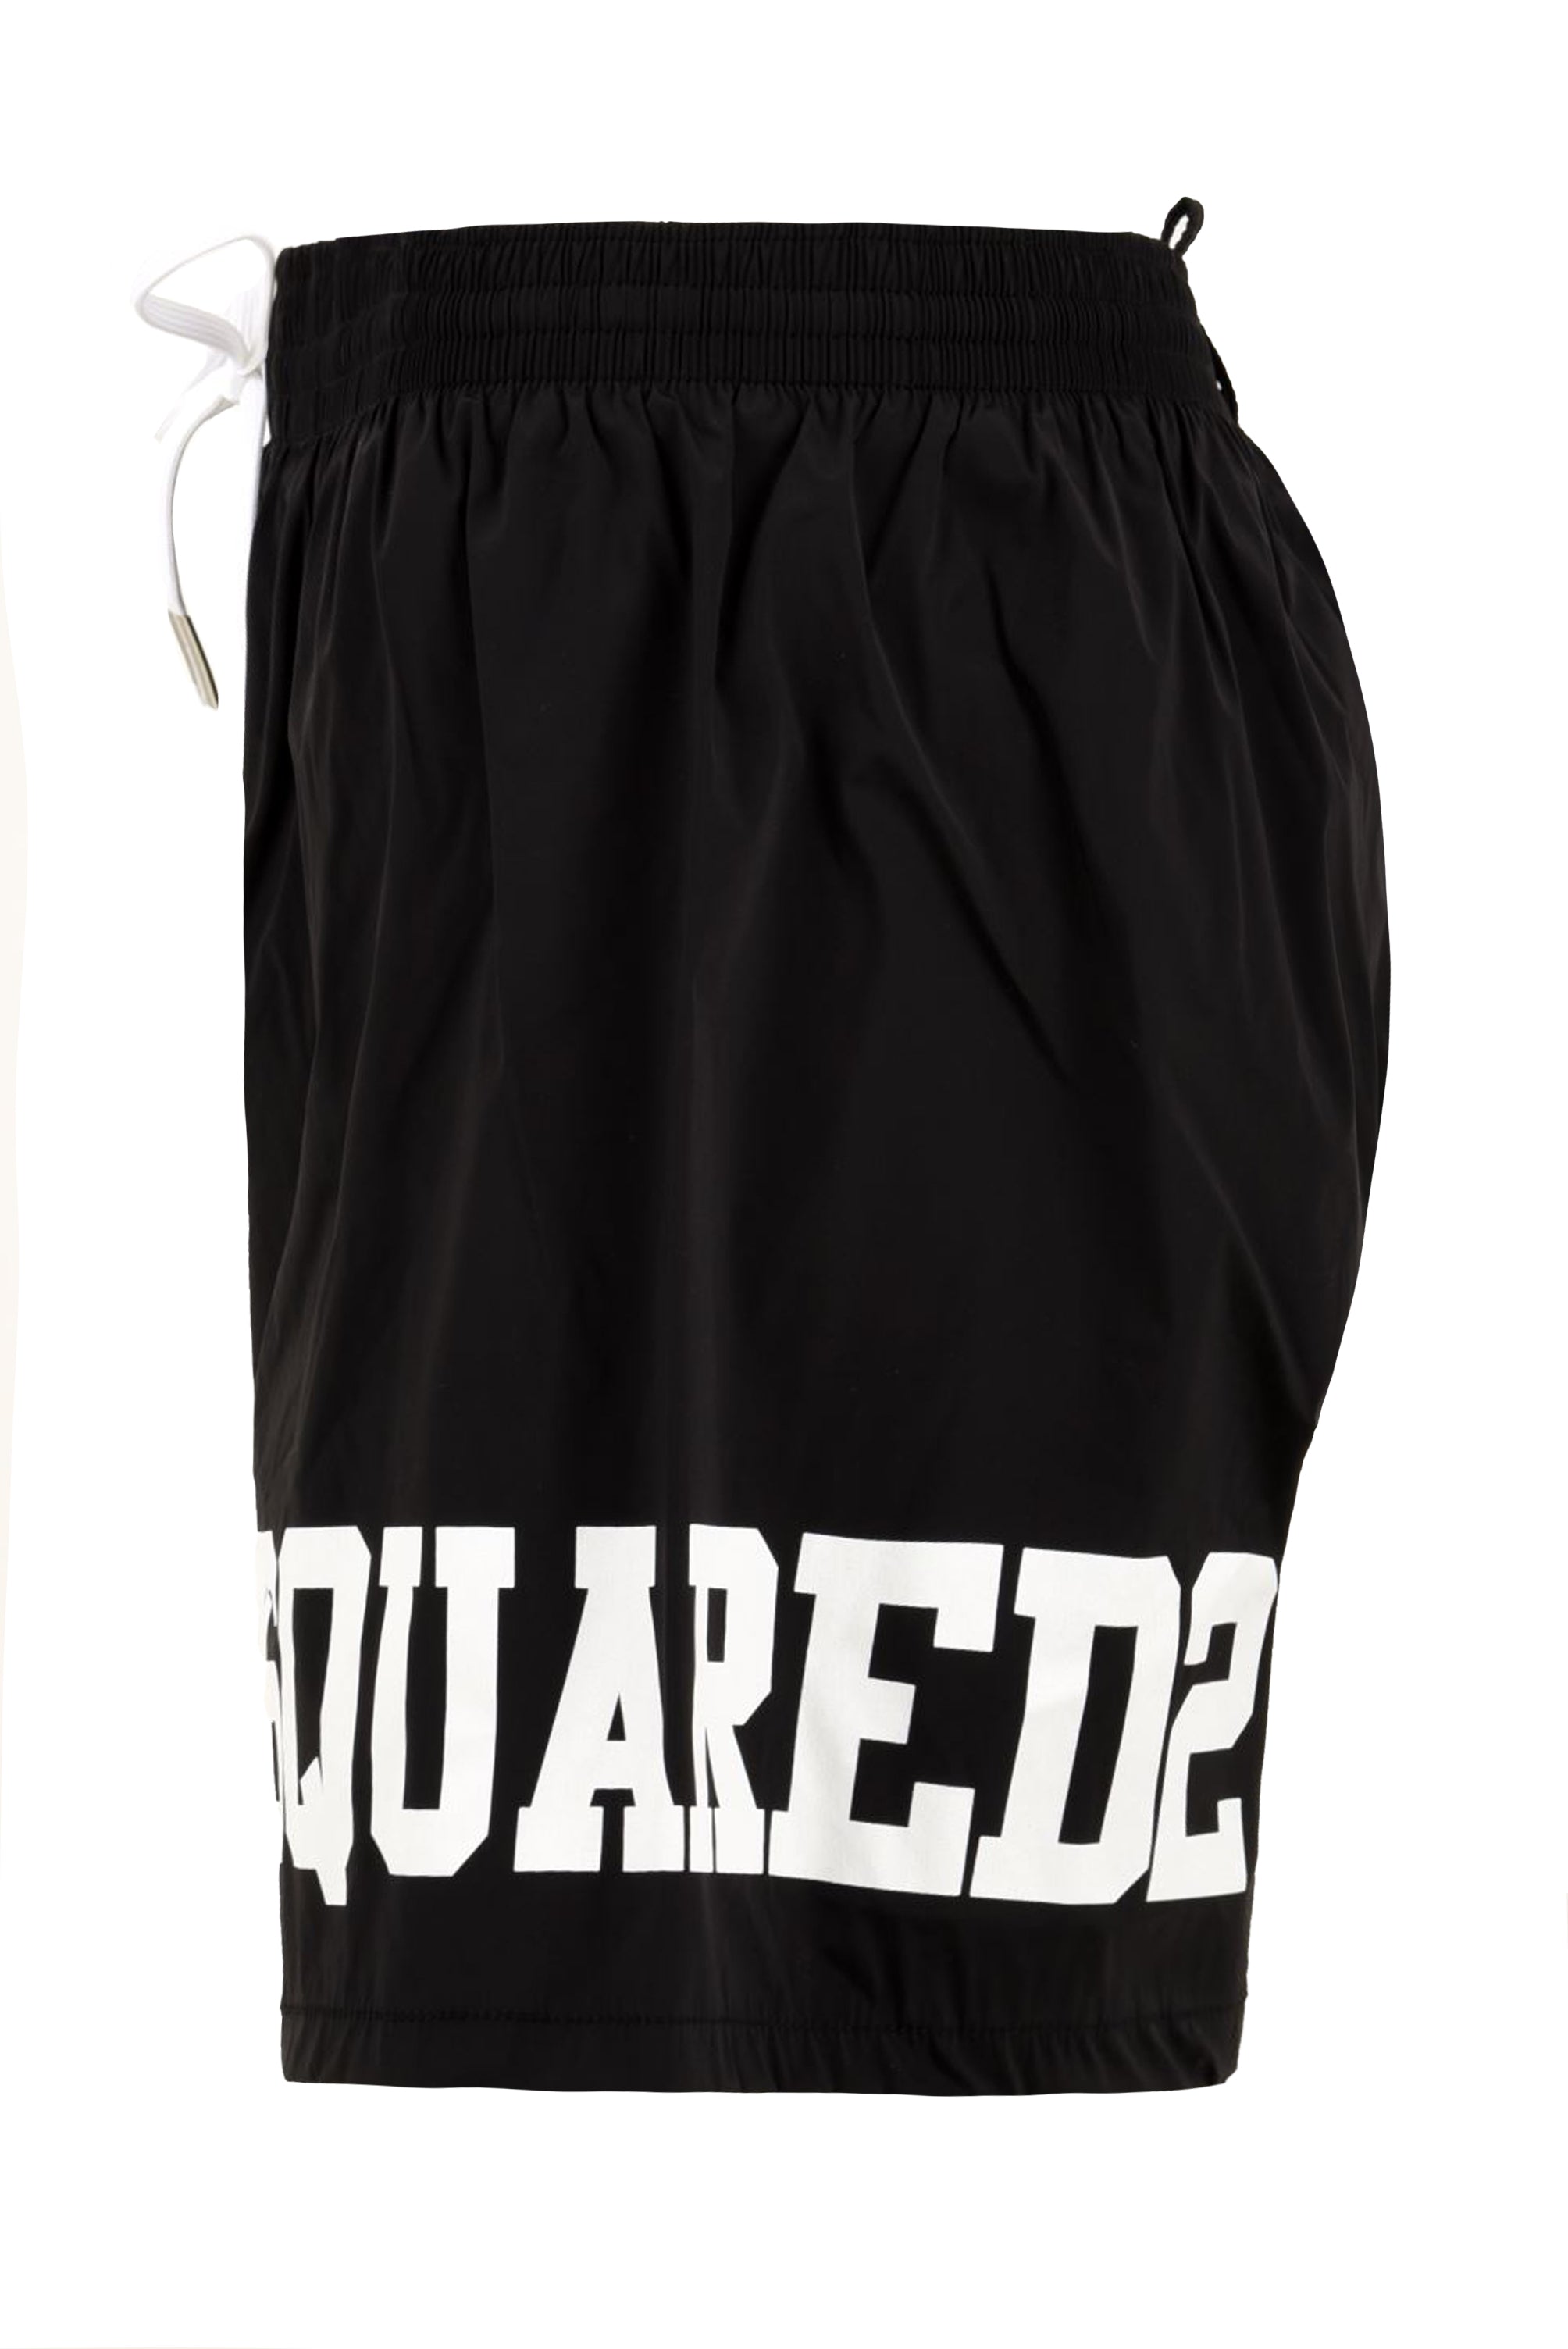 Men's swimsuit with puller on the back